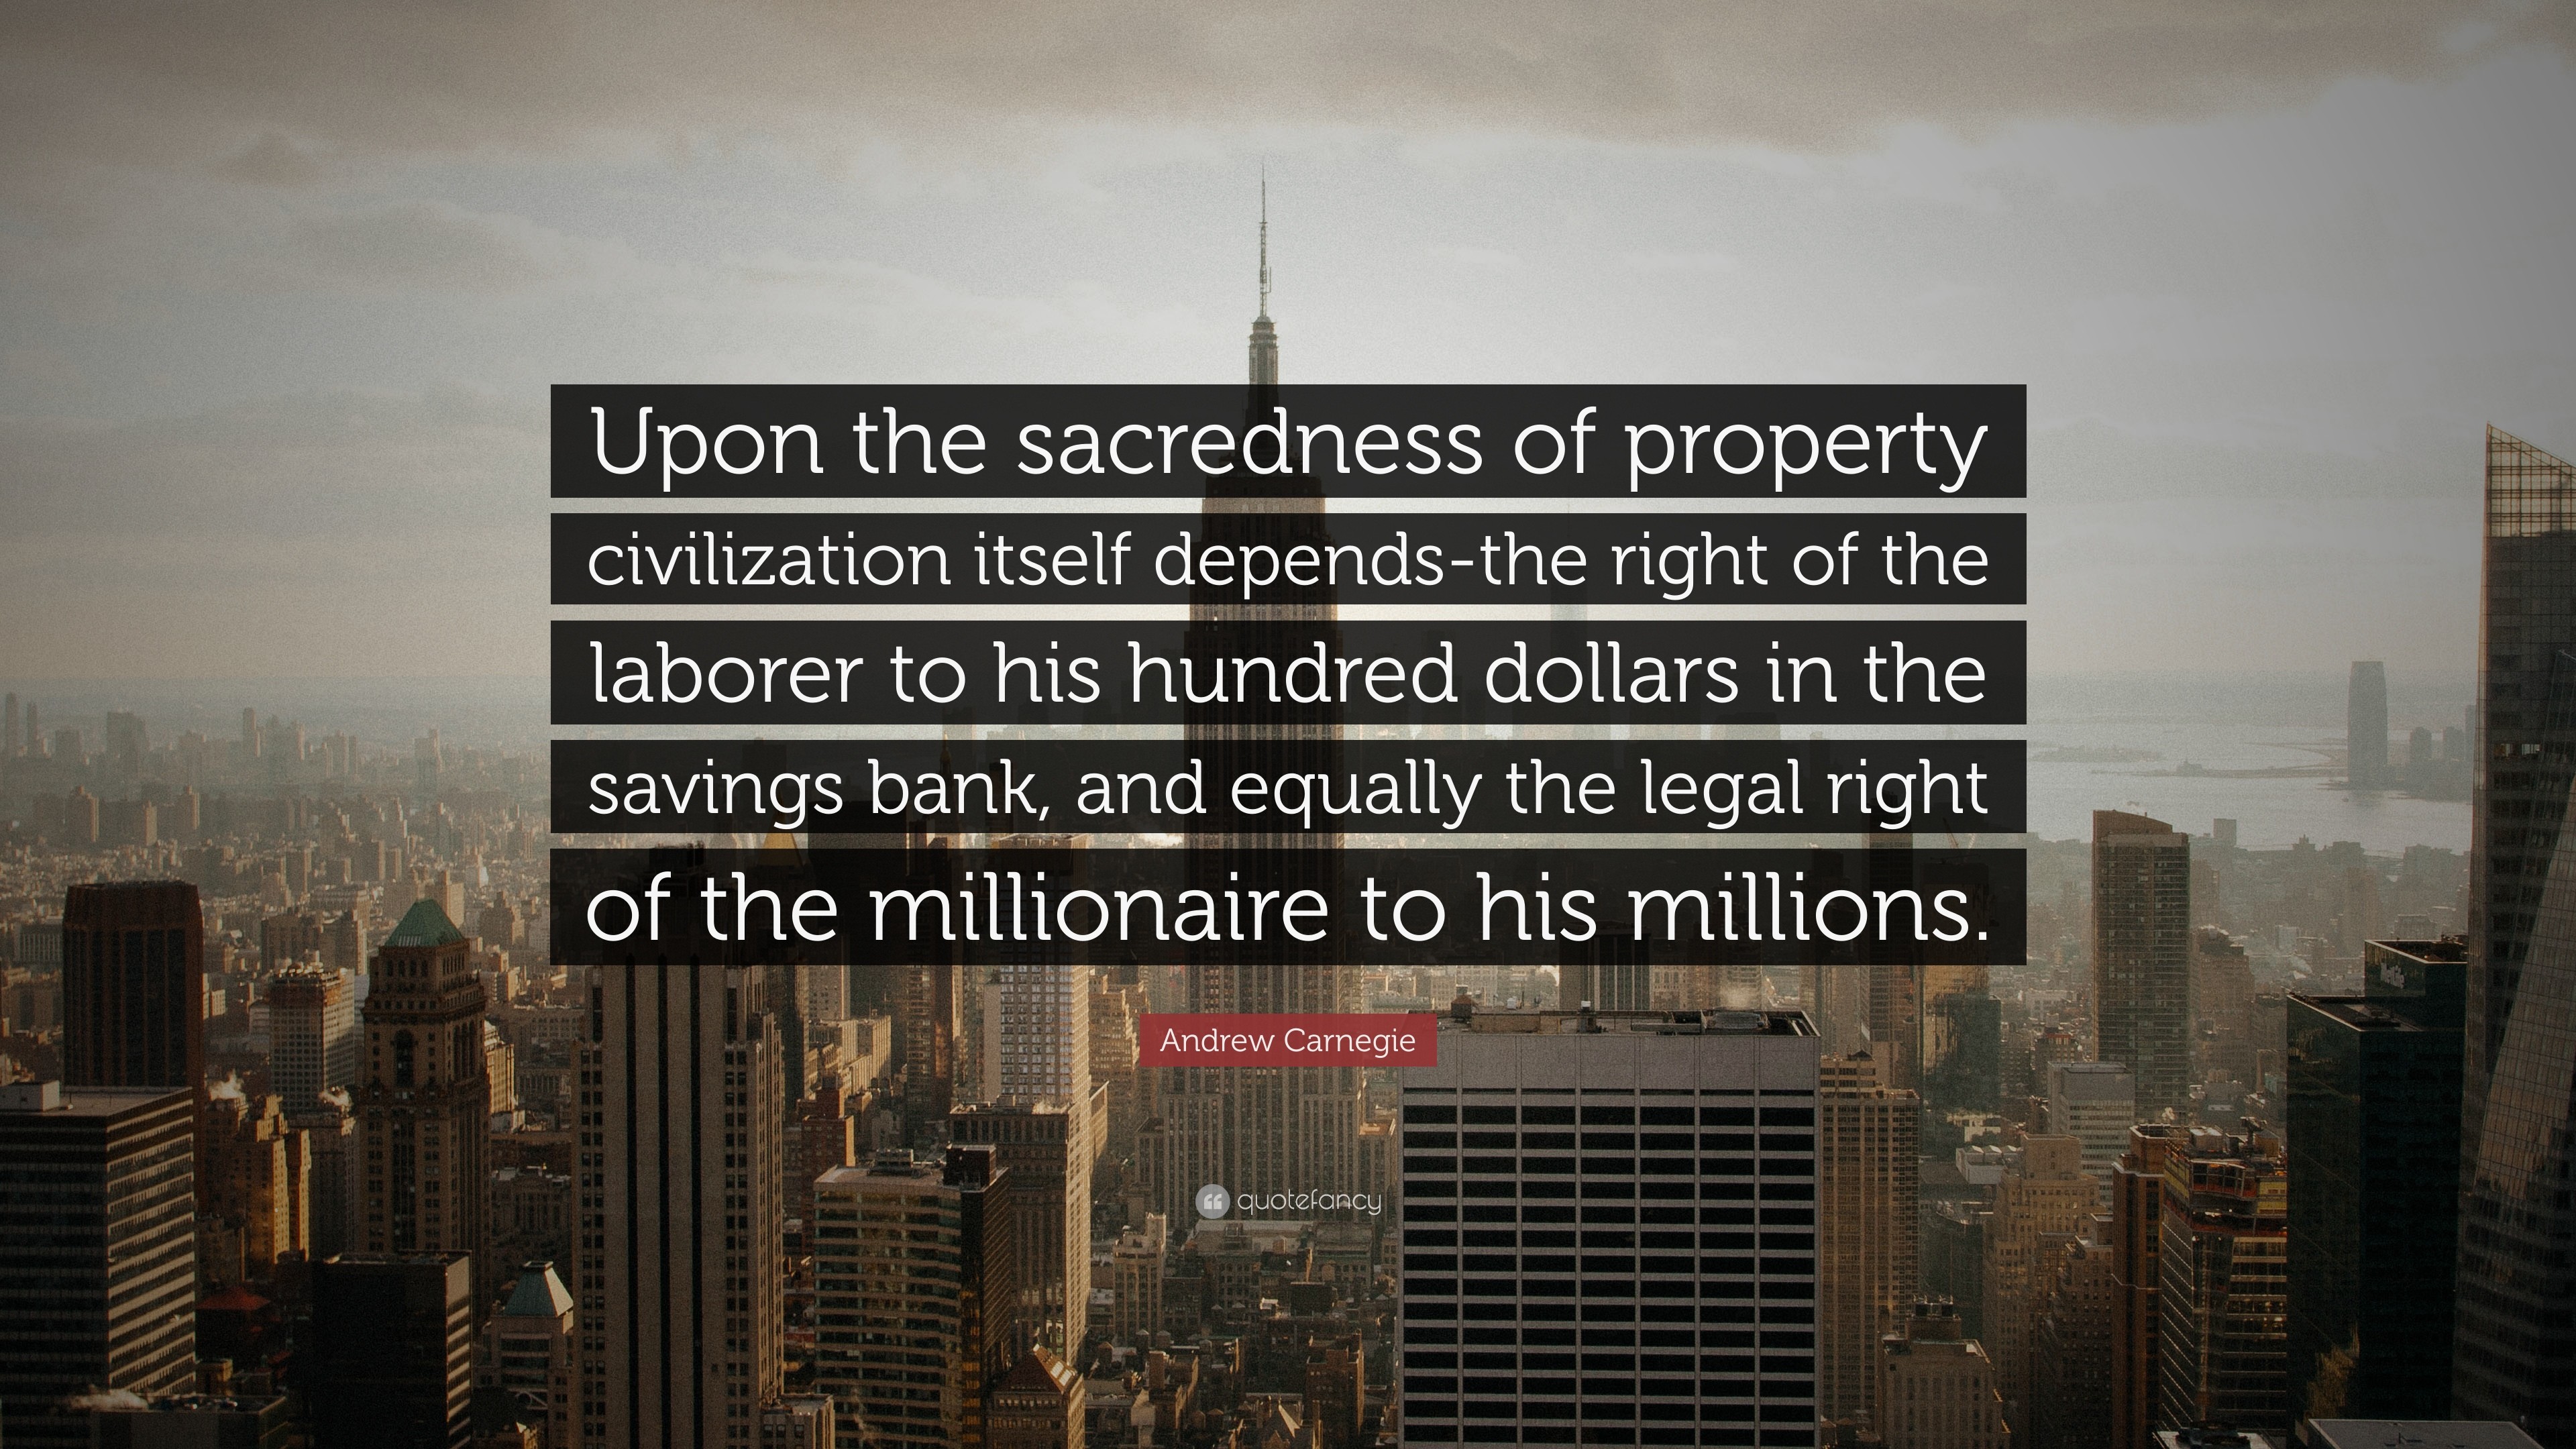 3840x2160 Andrew Carnegie Quote: “Upon the sacredness of property civilization itself  depends-the right